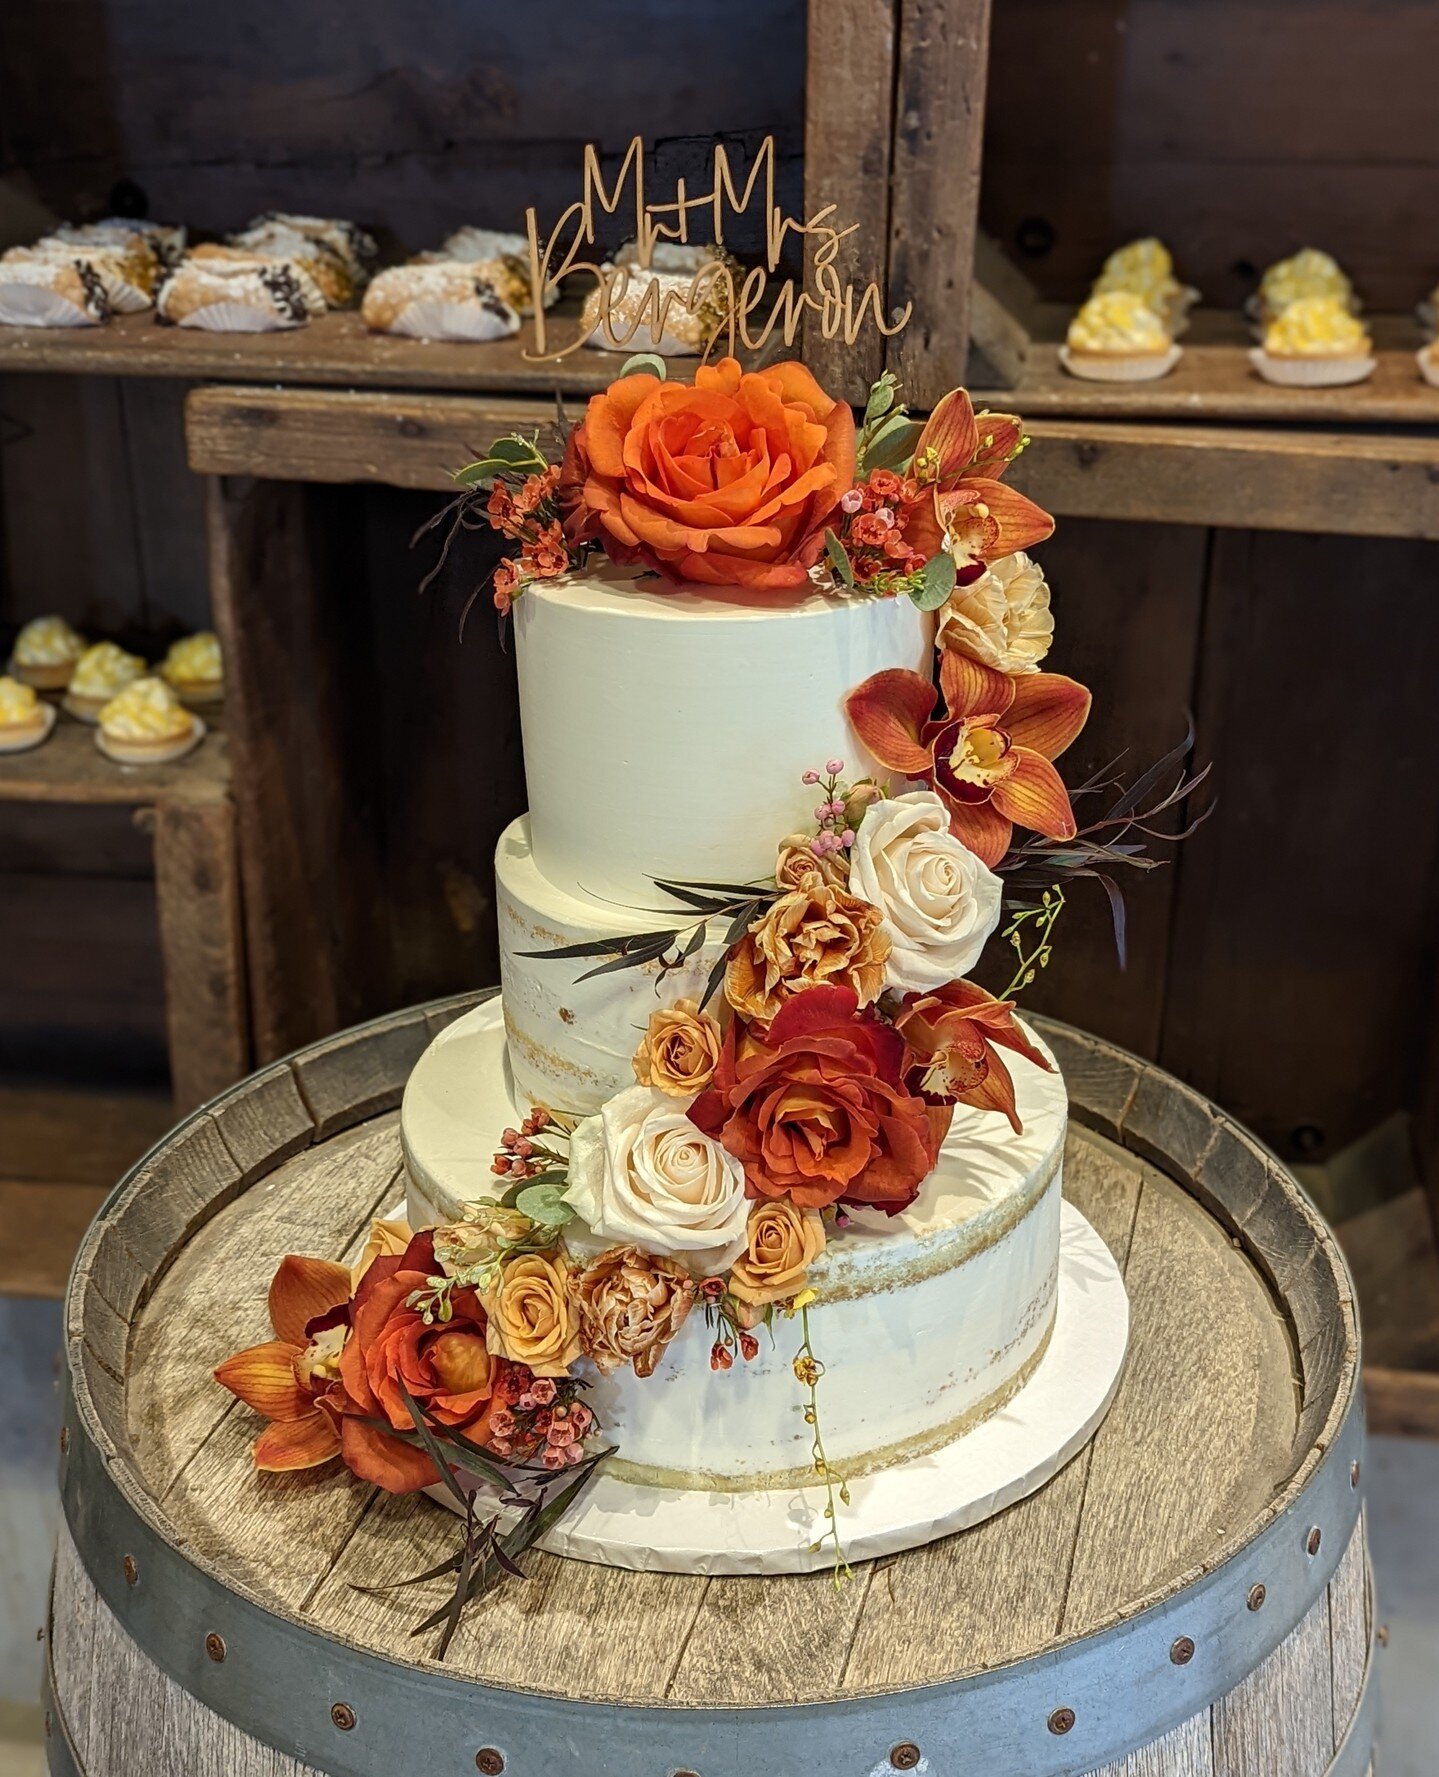 Gorgeous fall florals on this naked cake 😍⁠
⁠
⁠
Have an upcoming wedding? Call us at⁠
(951) 699-2399 for a wedding consultation⁠
or visit our website at www.1914bakery.com for more info!⁠
⁠
#dessert #cakedesigner #flowers #temeculawine #chocolate #f